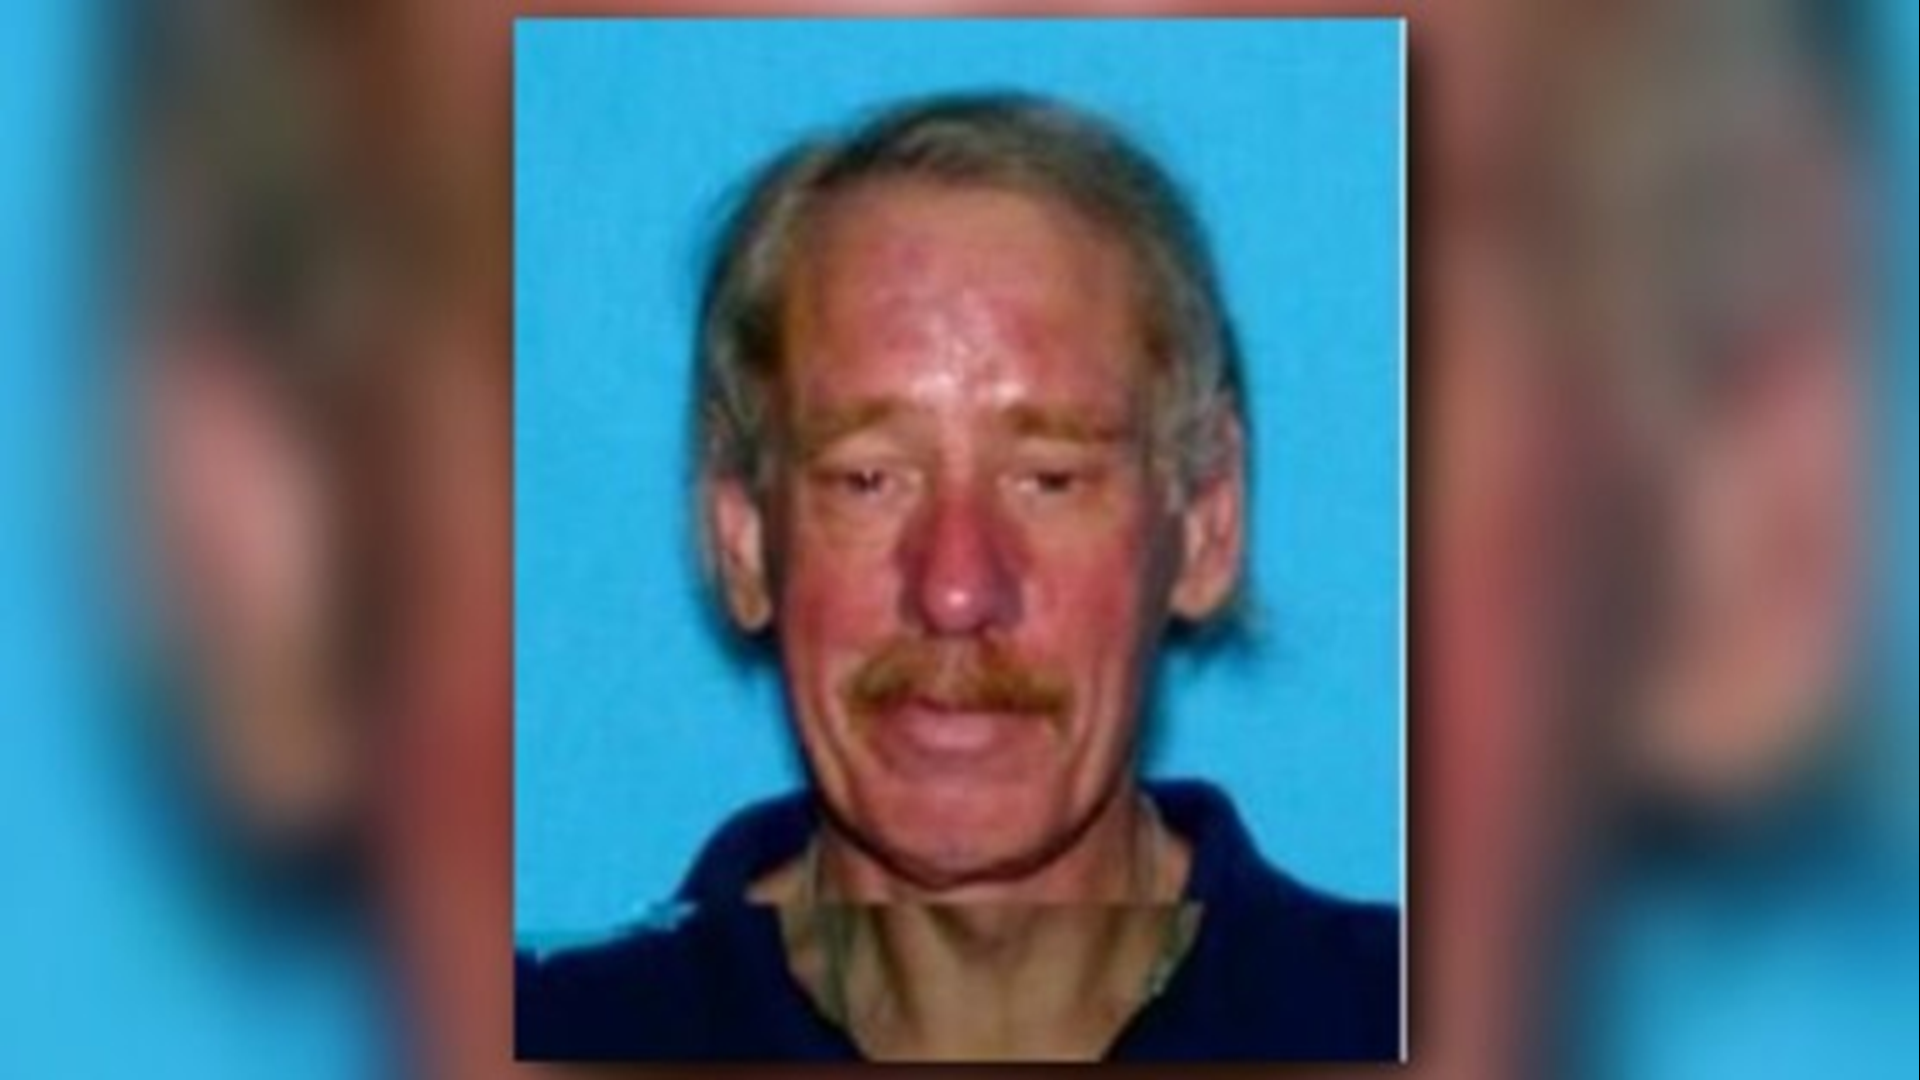 GRPD says Howard Payne, who had been missing since Monday night, have been located and safely returned back to his home.